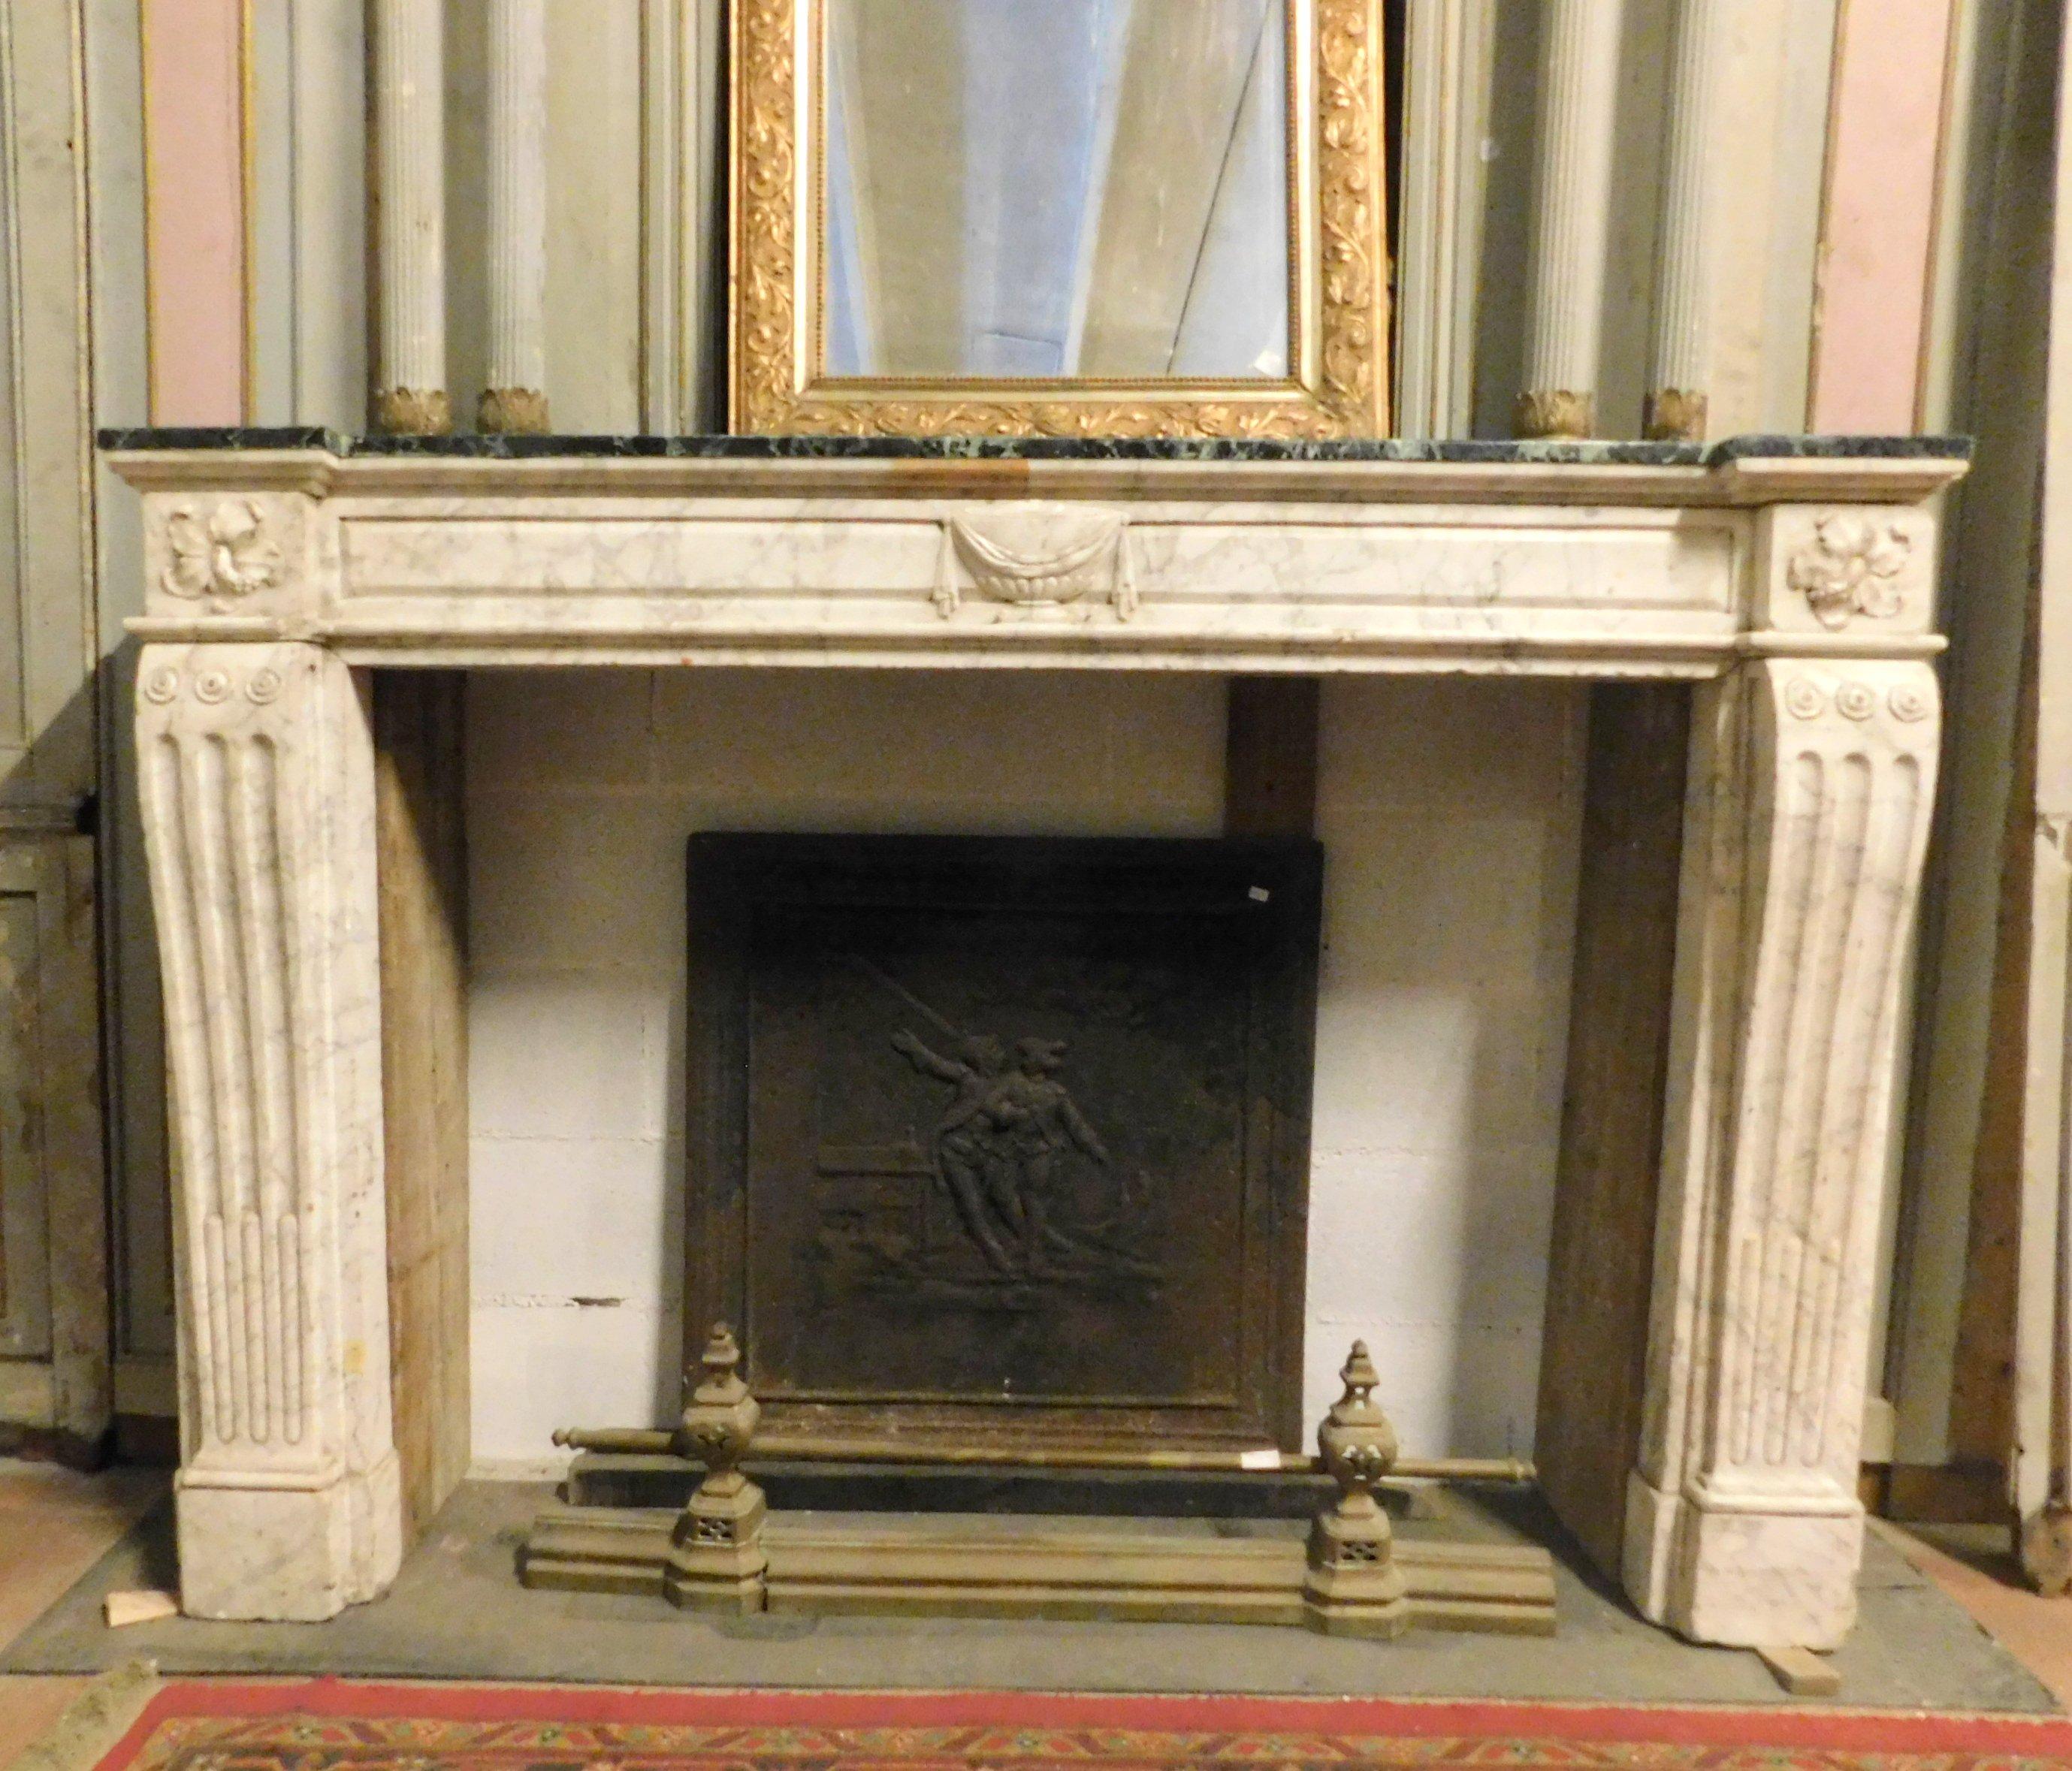 Hand-Carved Antique Fireplace in White and Green Marble, Louis XVI, 18th Century France